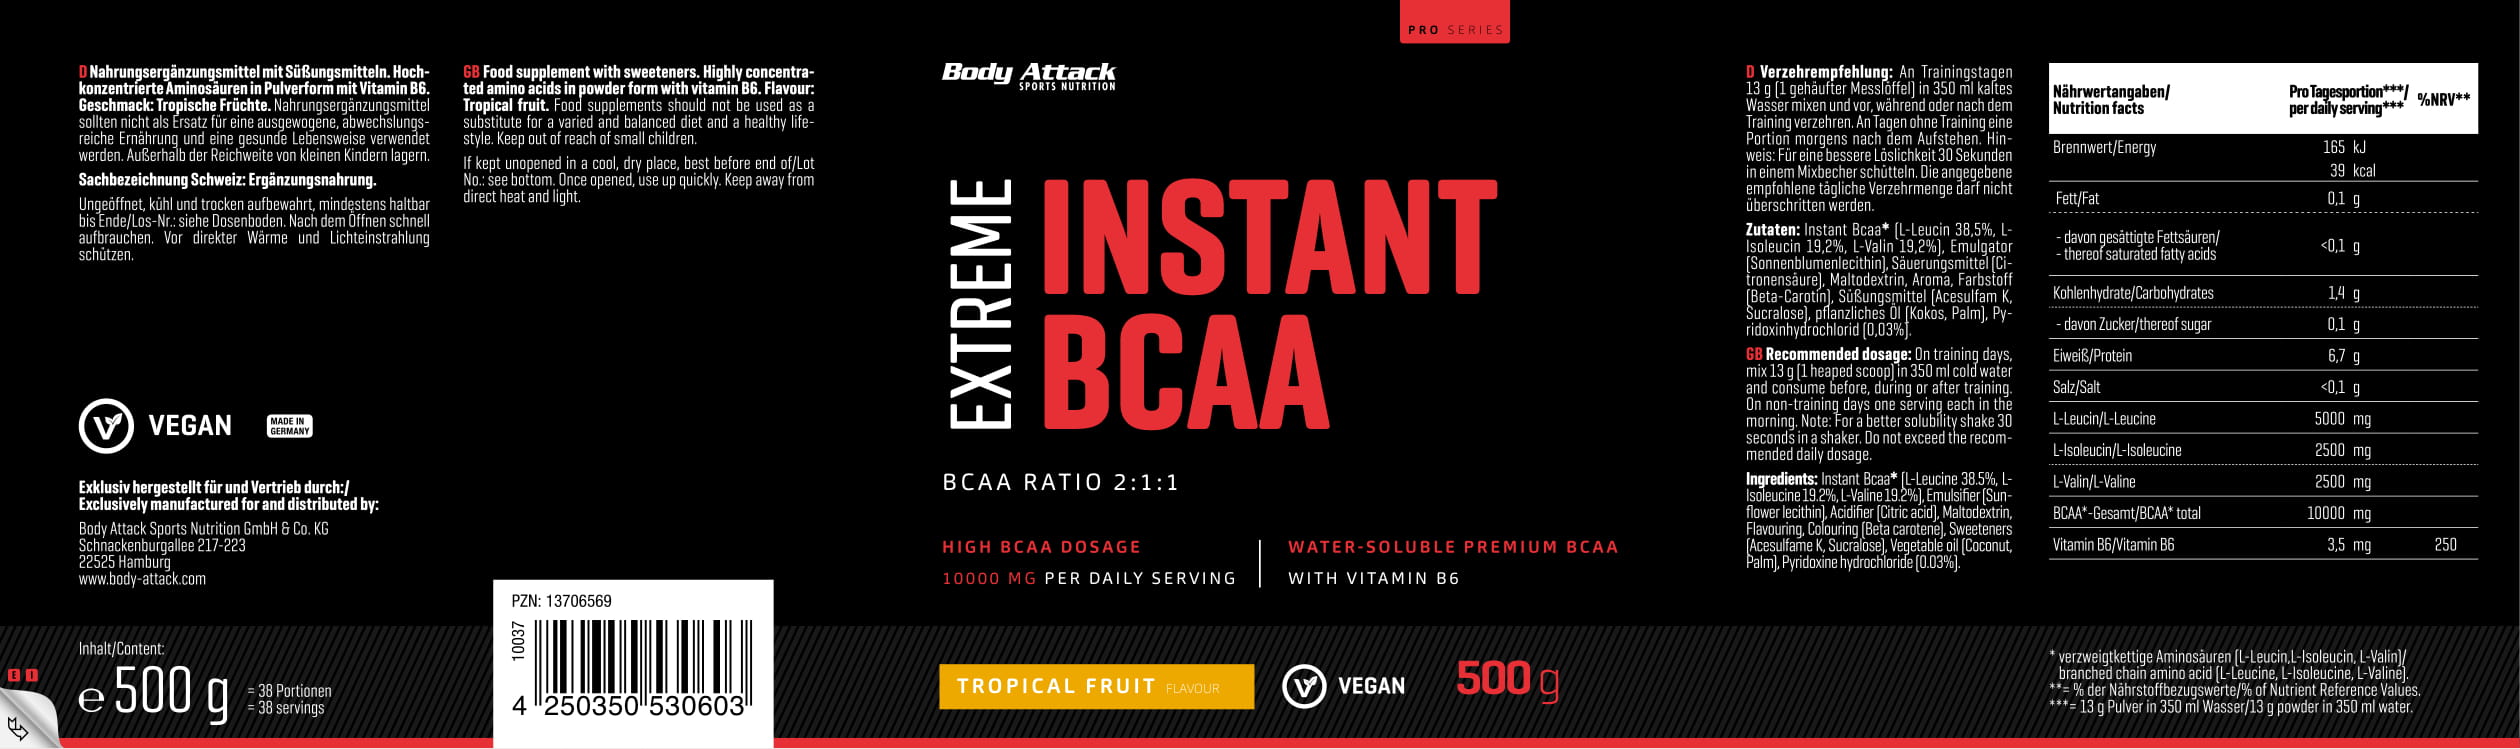 Body Attack Extreme Instant BCAA (500g Dose)